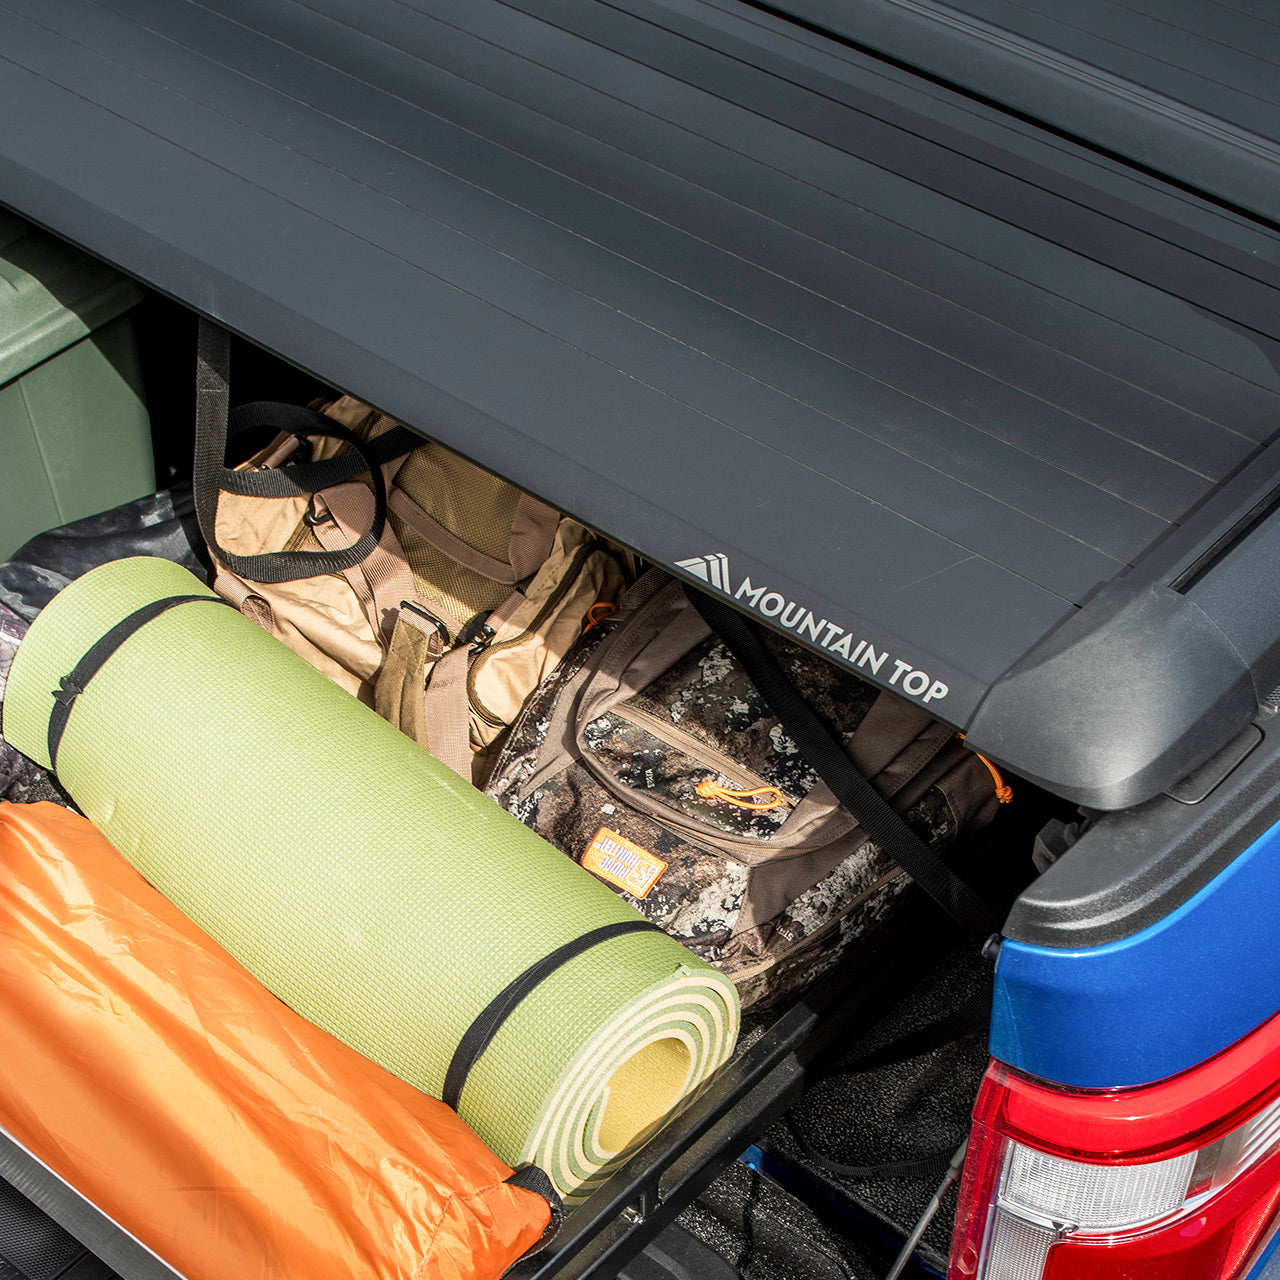 EVO-M Retractable Truck bed cover on a Ford F150 protecting camping gear